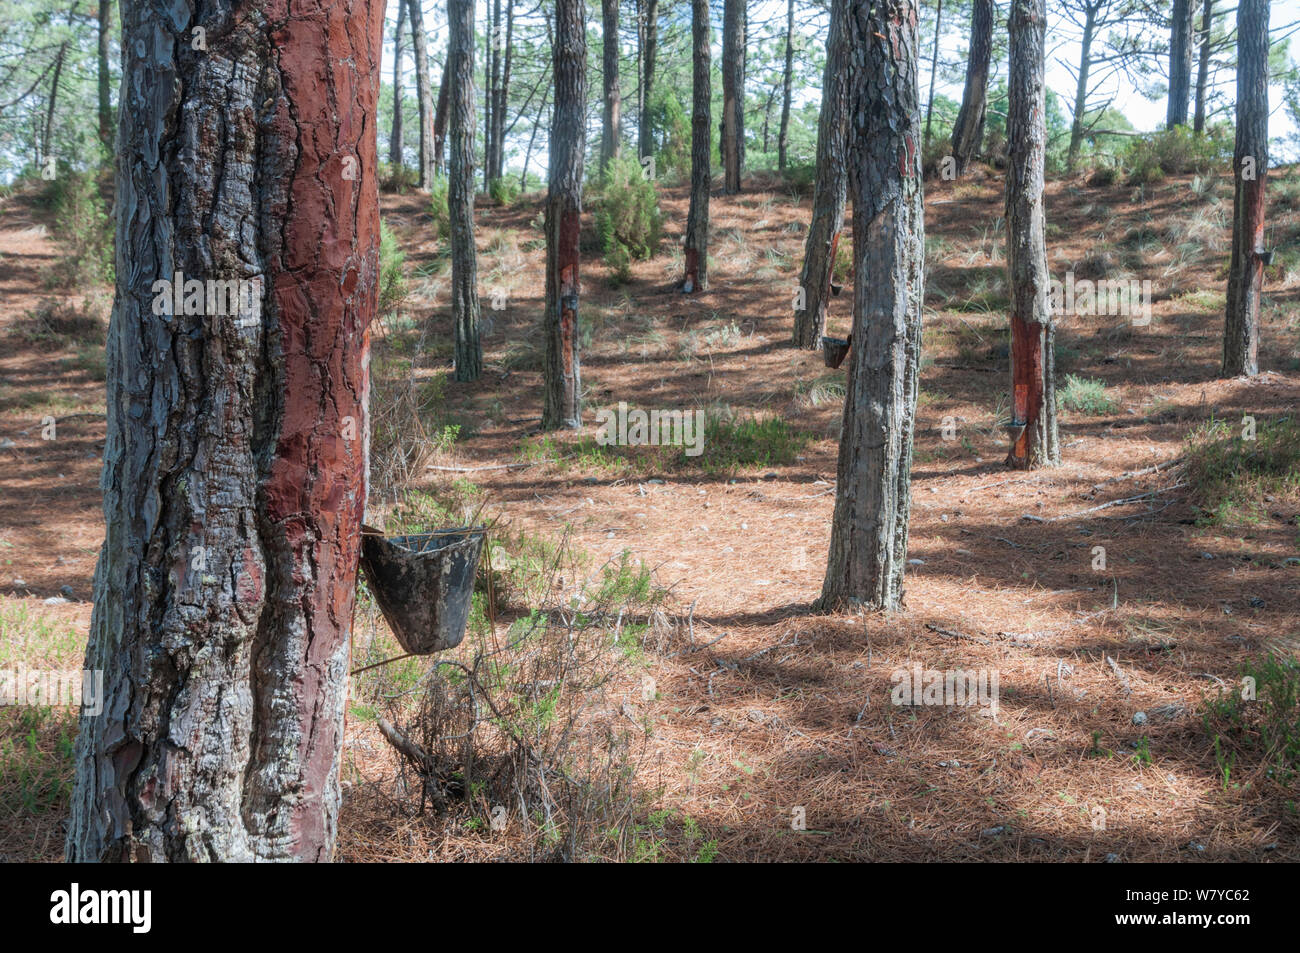 Maritime Pine (Pinus pinaster) trees tapped for resin (used for making turpentine). Portugal, September 2014. Stock Photo